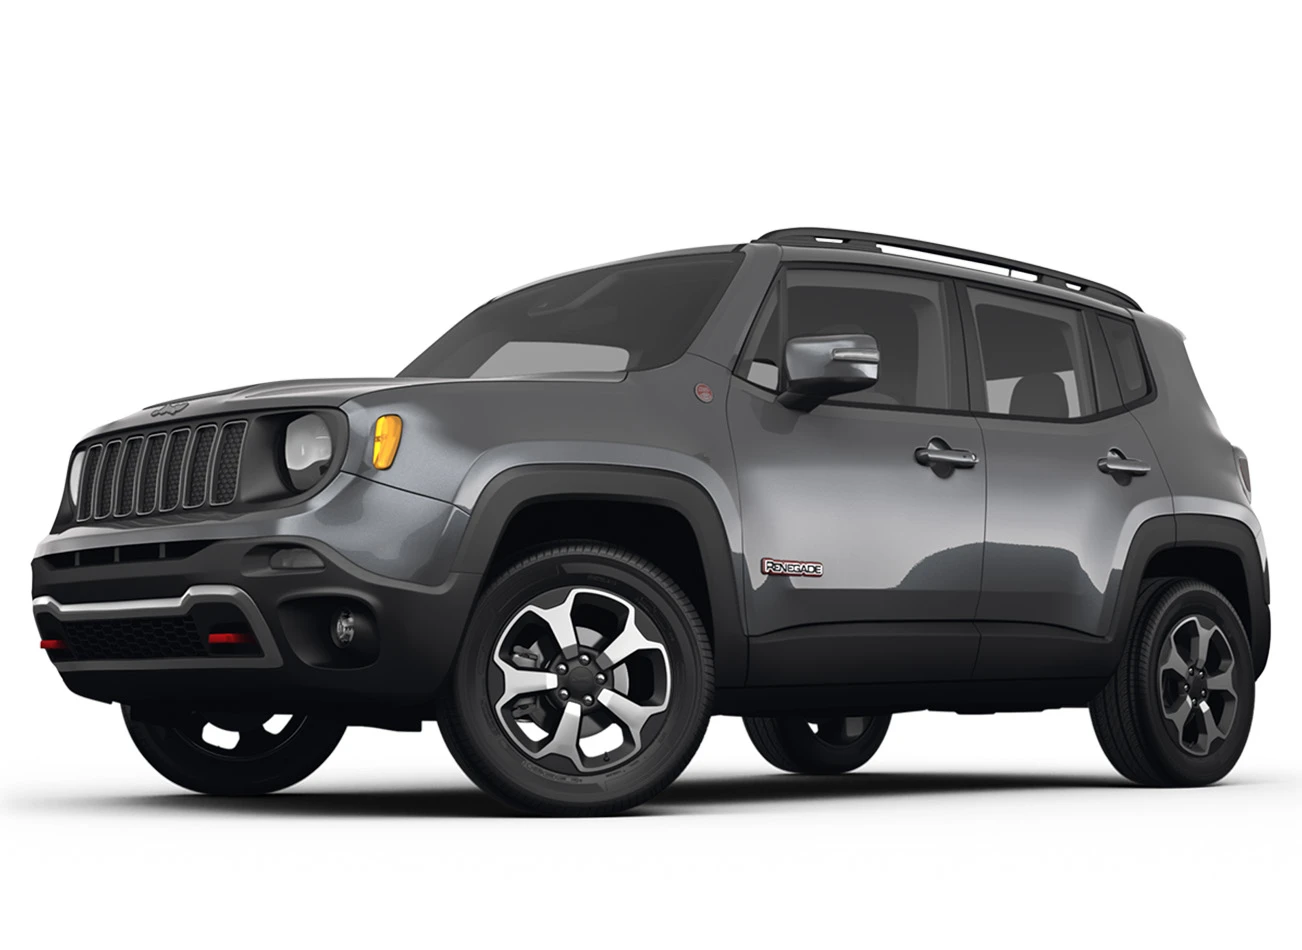 2021 Jeep Renegade: Exterior side view of vehicle